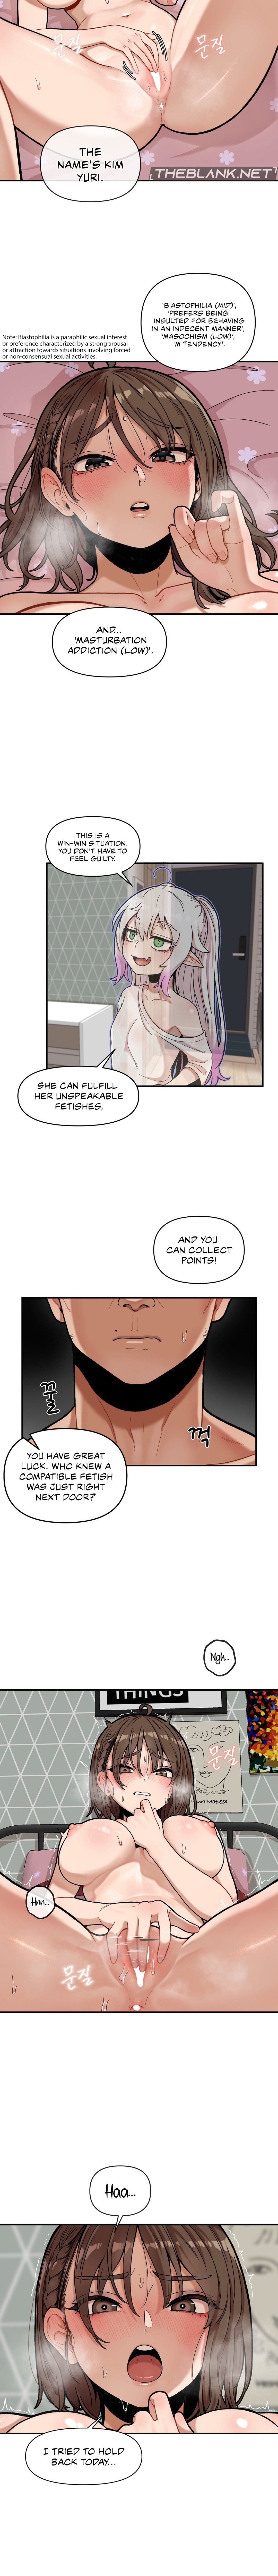 an-invisible-kiss-chap-4-2